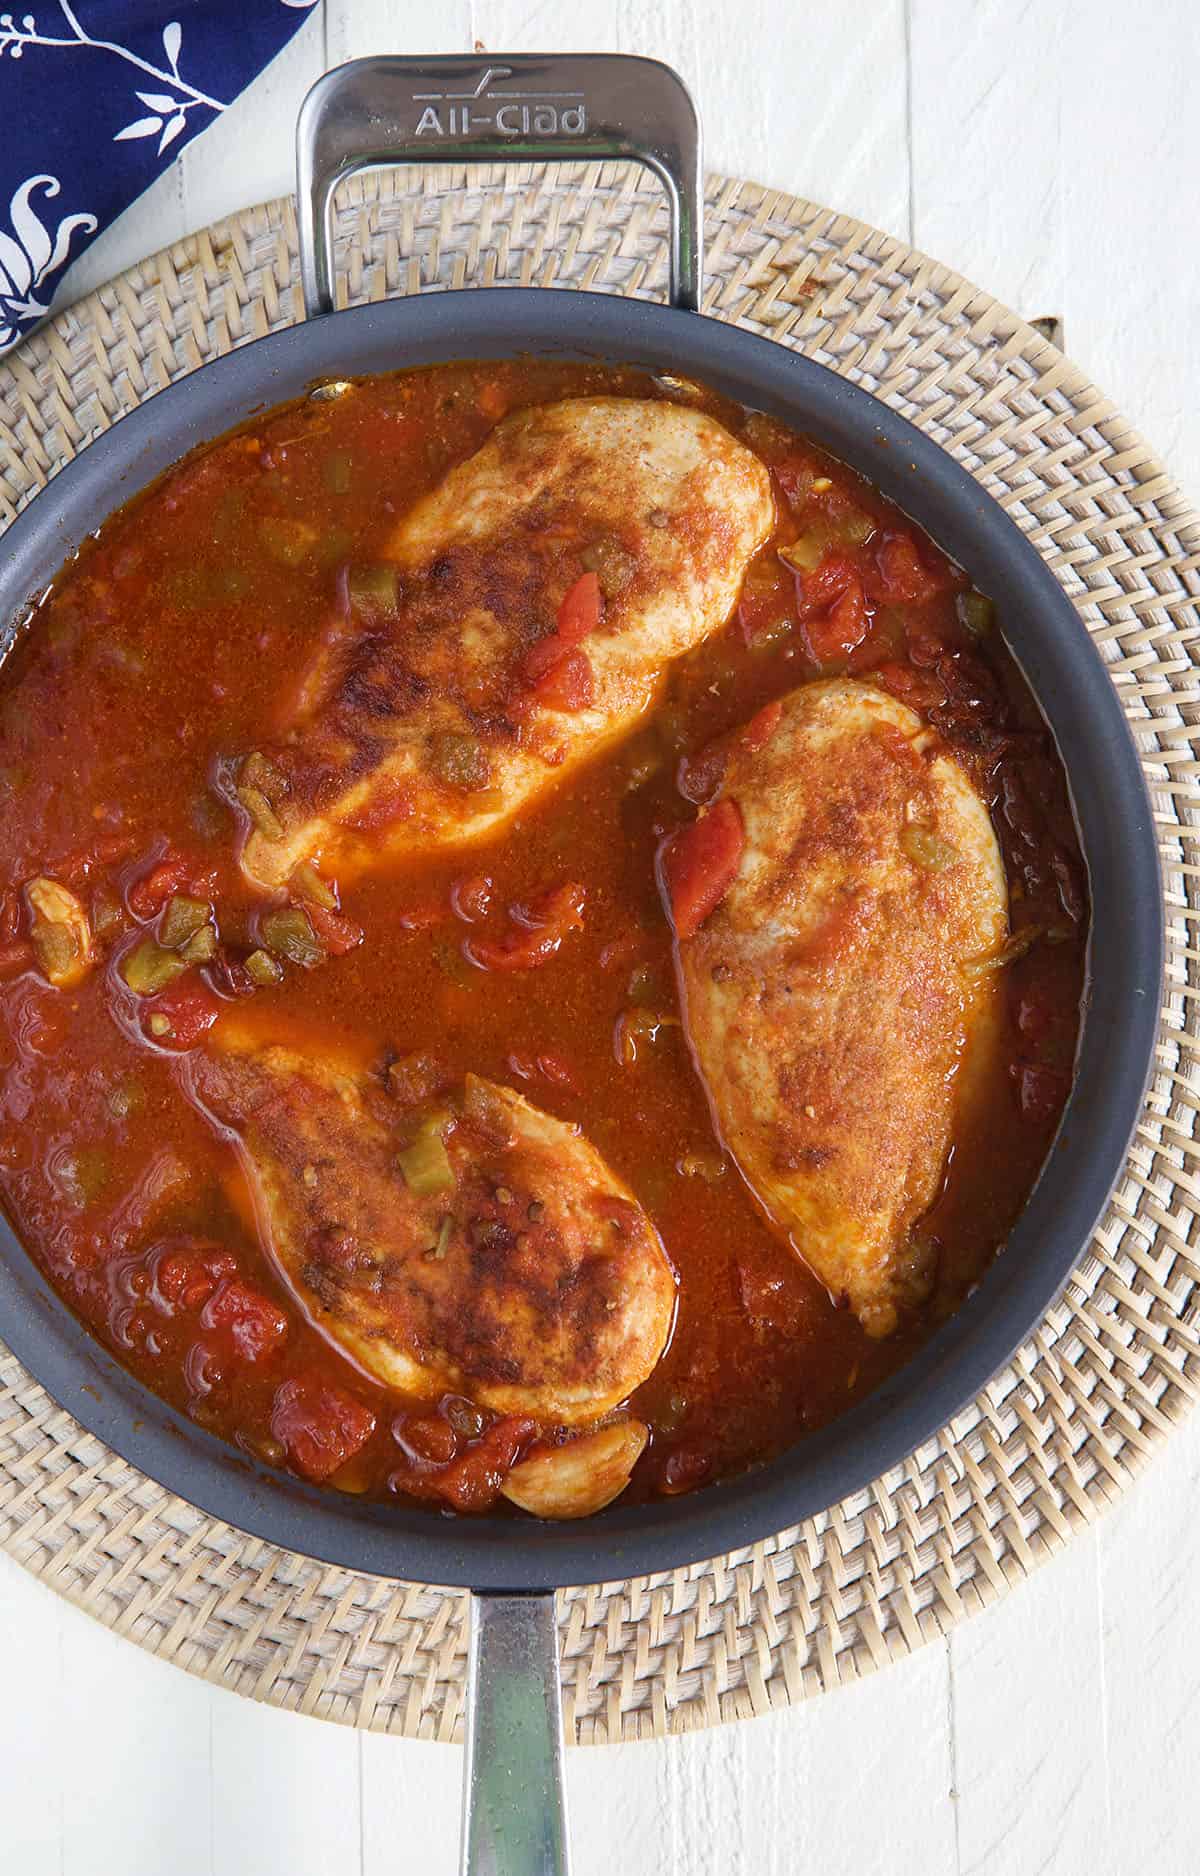 Three chicken breasts are placed in a skillet.